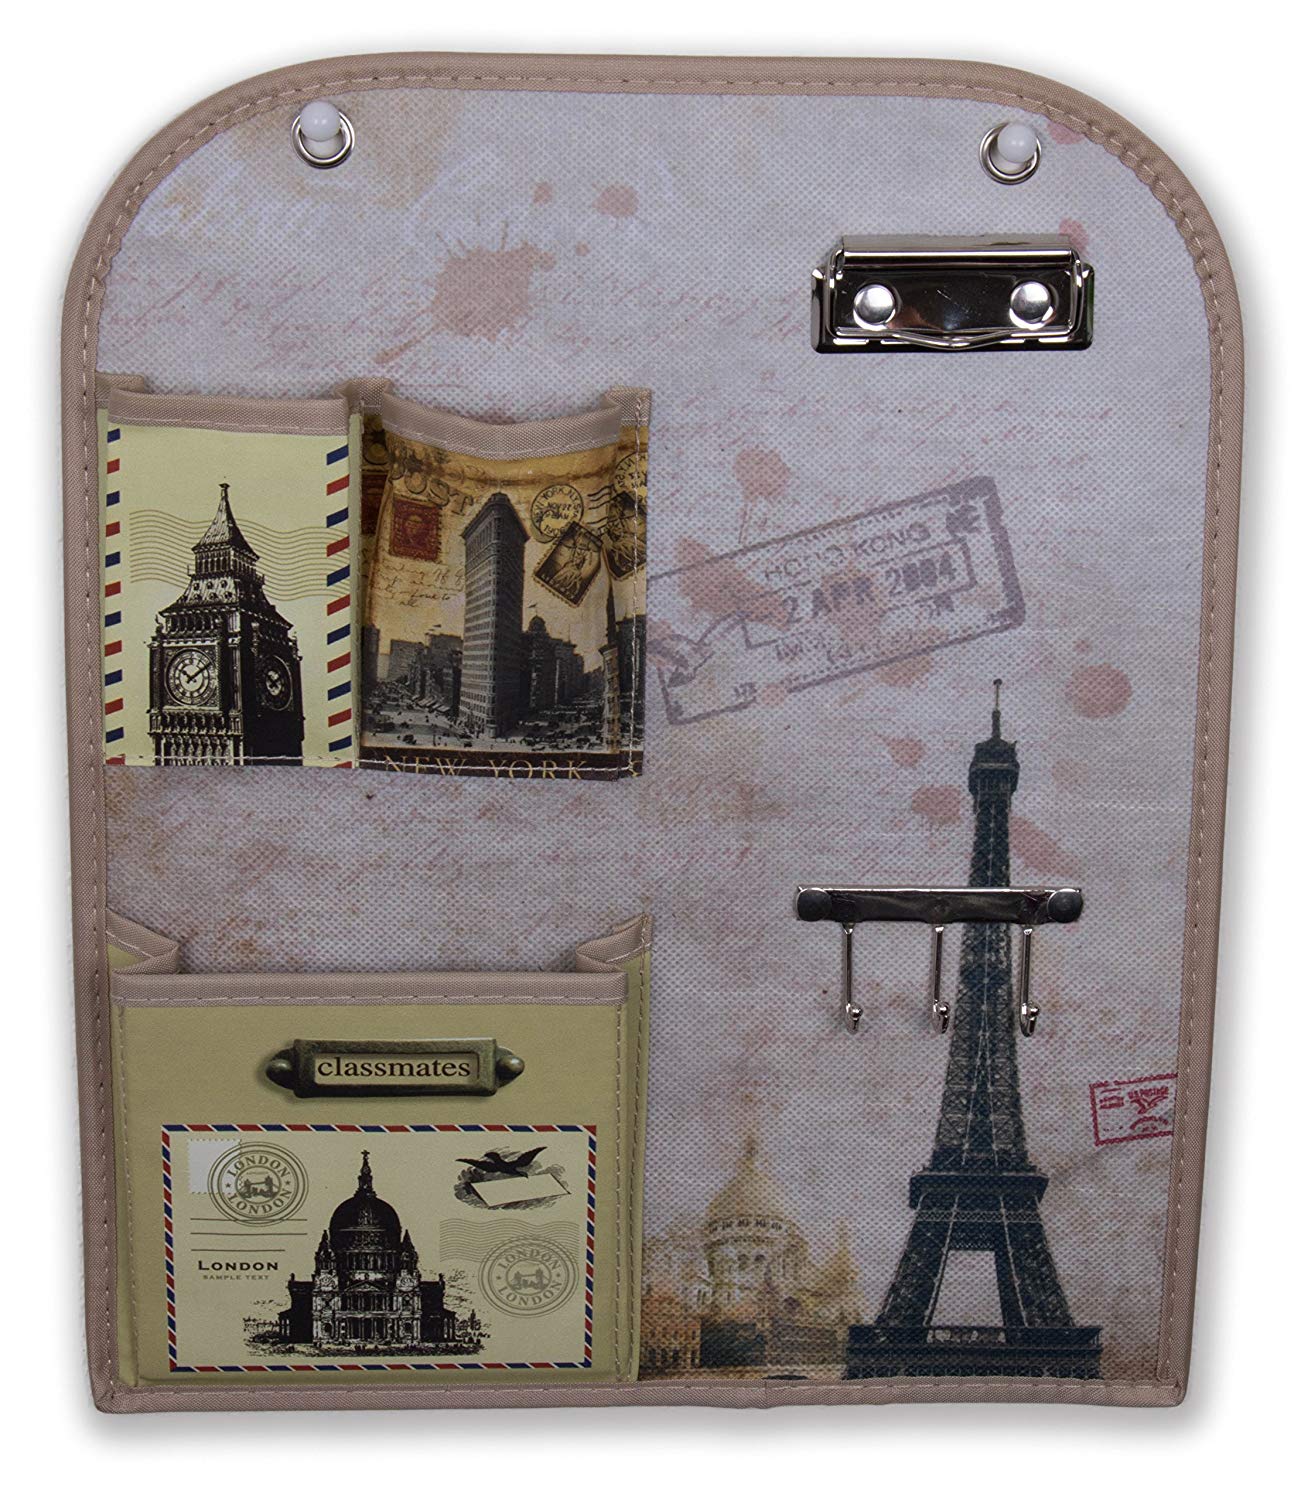 World Travel Themed Wall Hanging Organizer | Wall Hanging Locker Organizer With Key Holders, Clip Board, and Pockets | Attractive Design Endless Applications